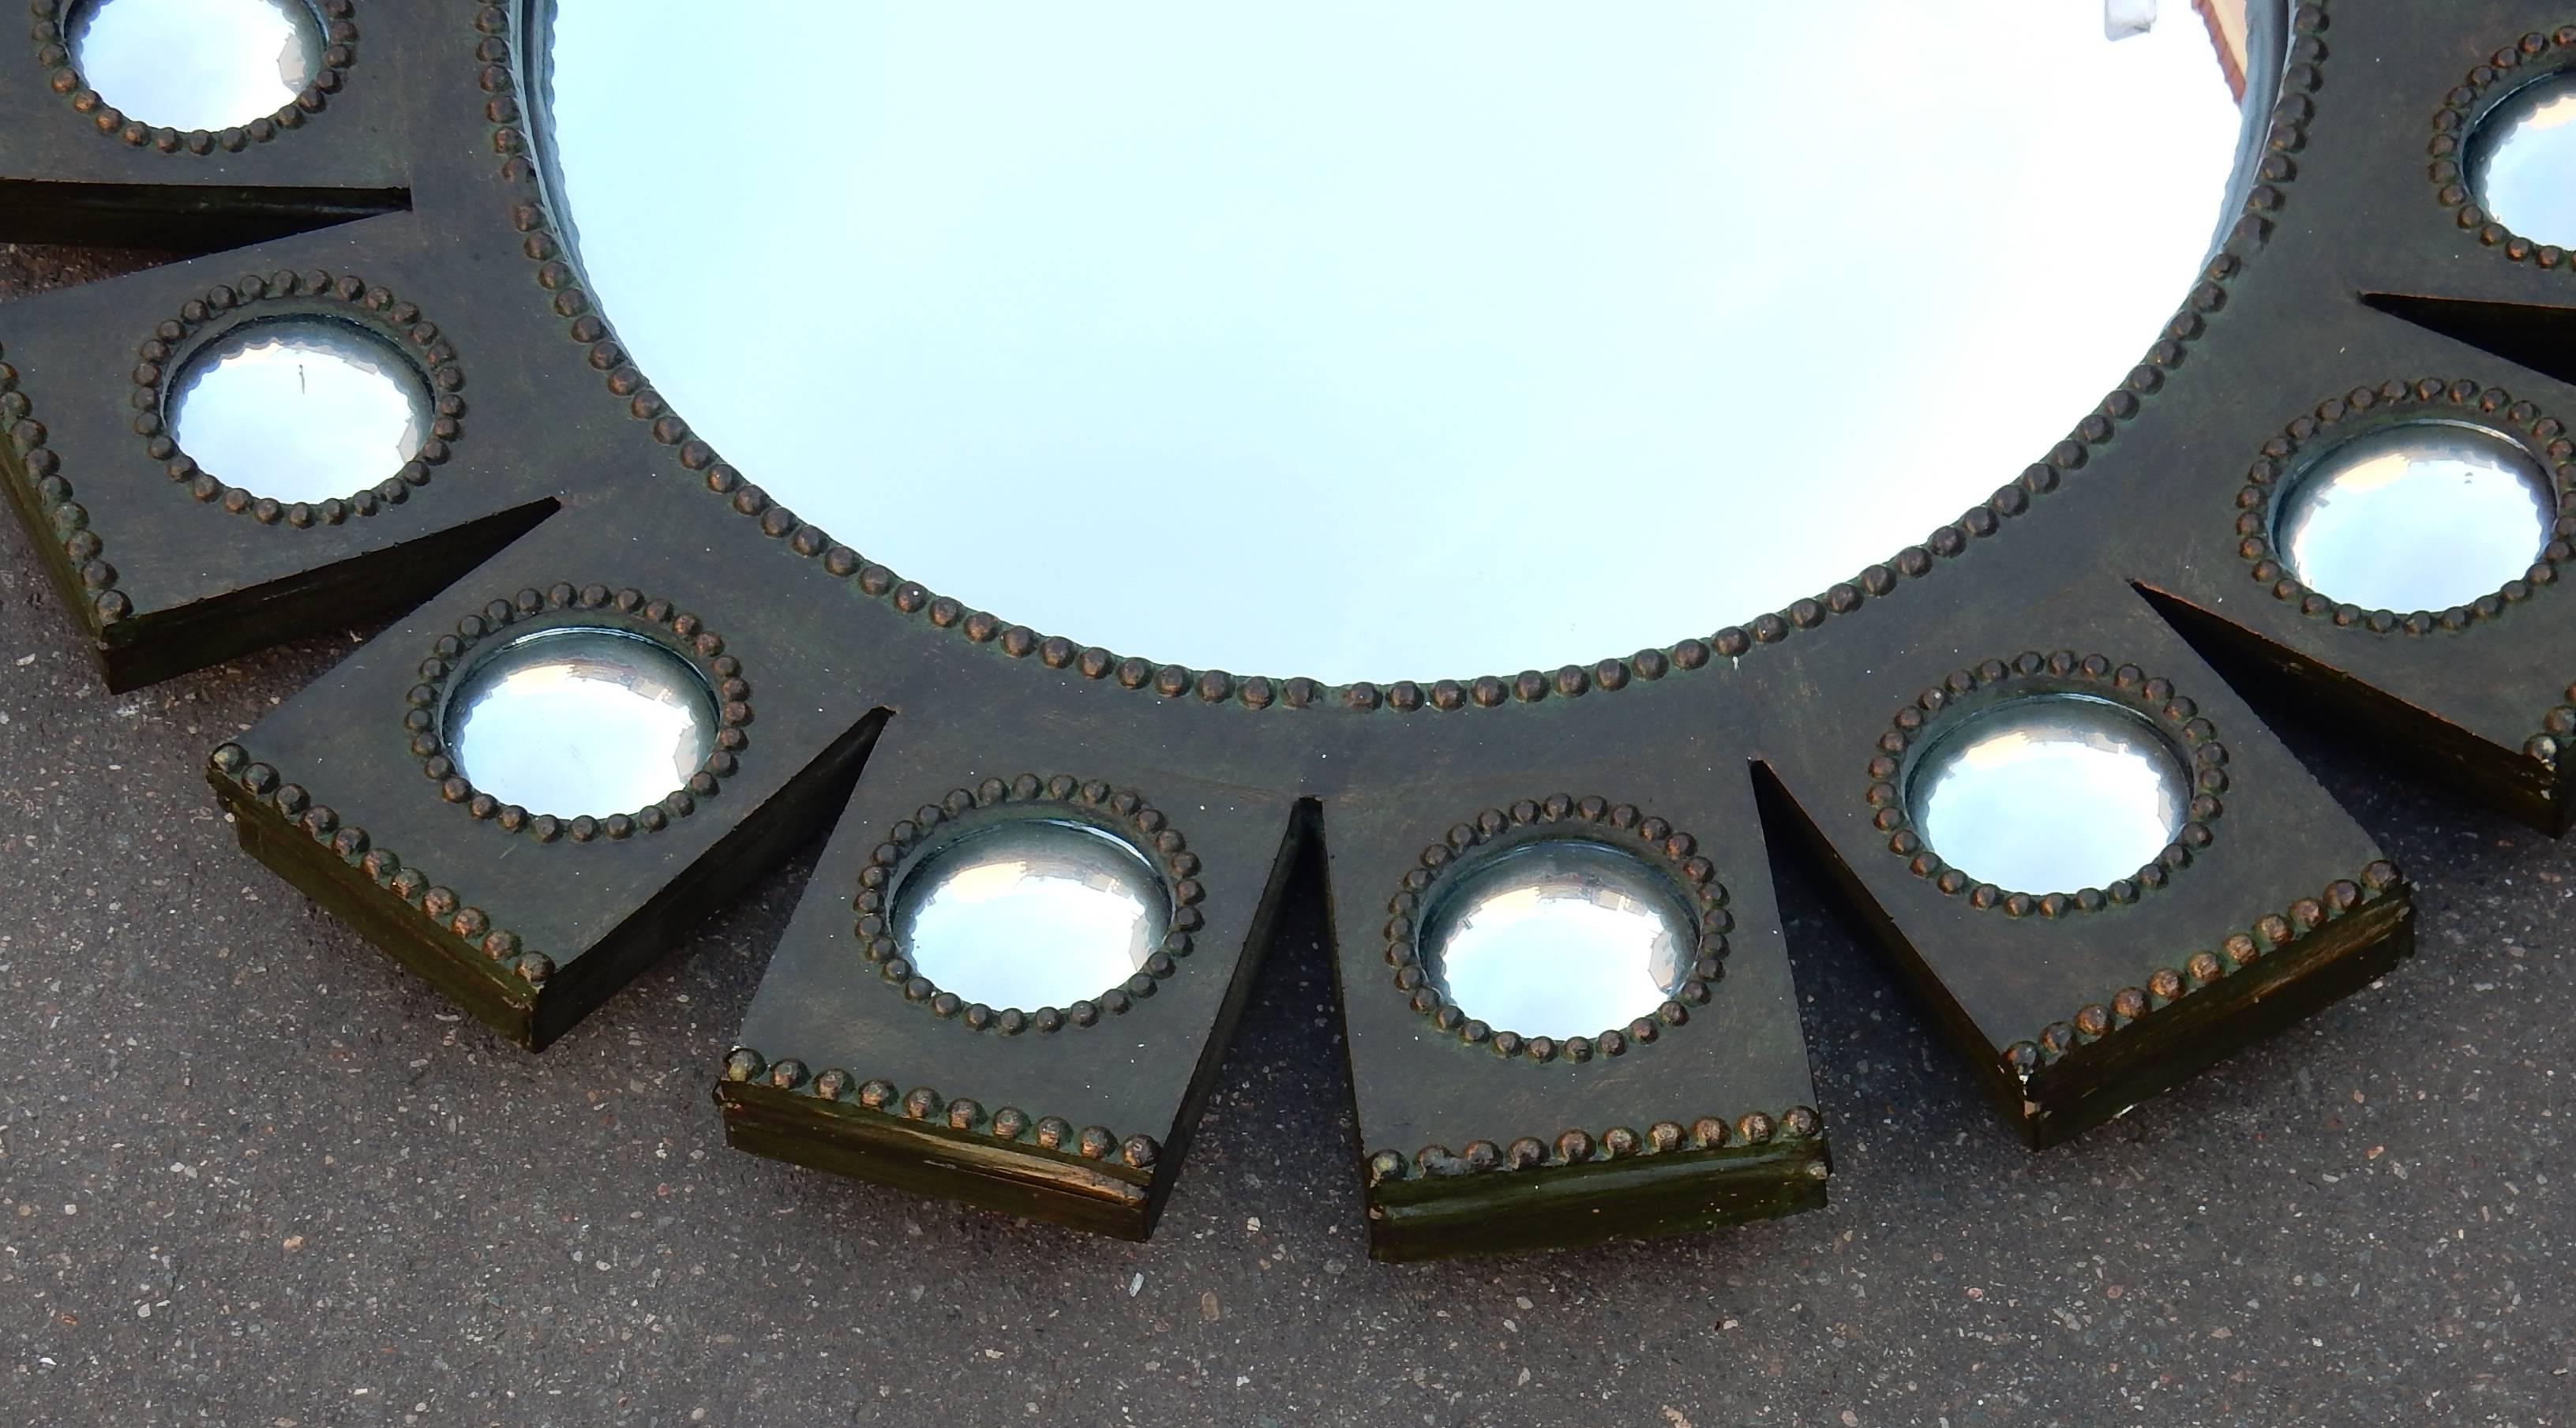 Painted 1970-1980 Convex Mirror with Its 16 Small Convex Mirrors